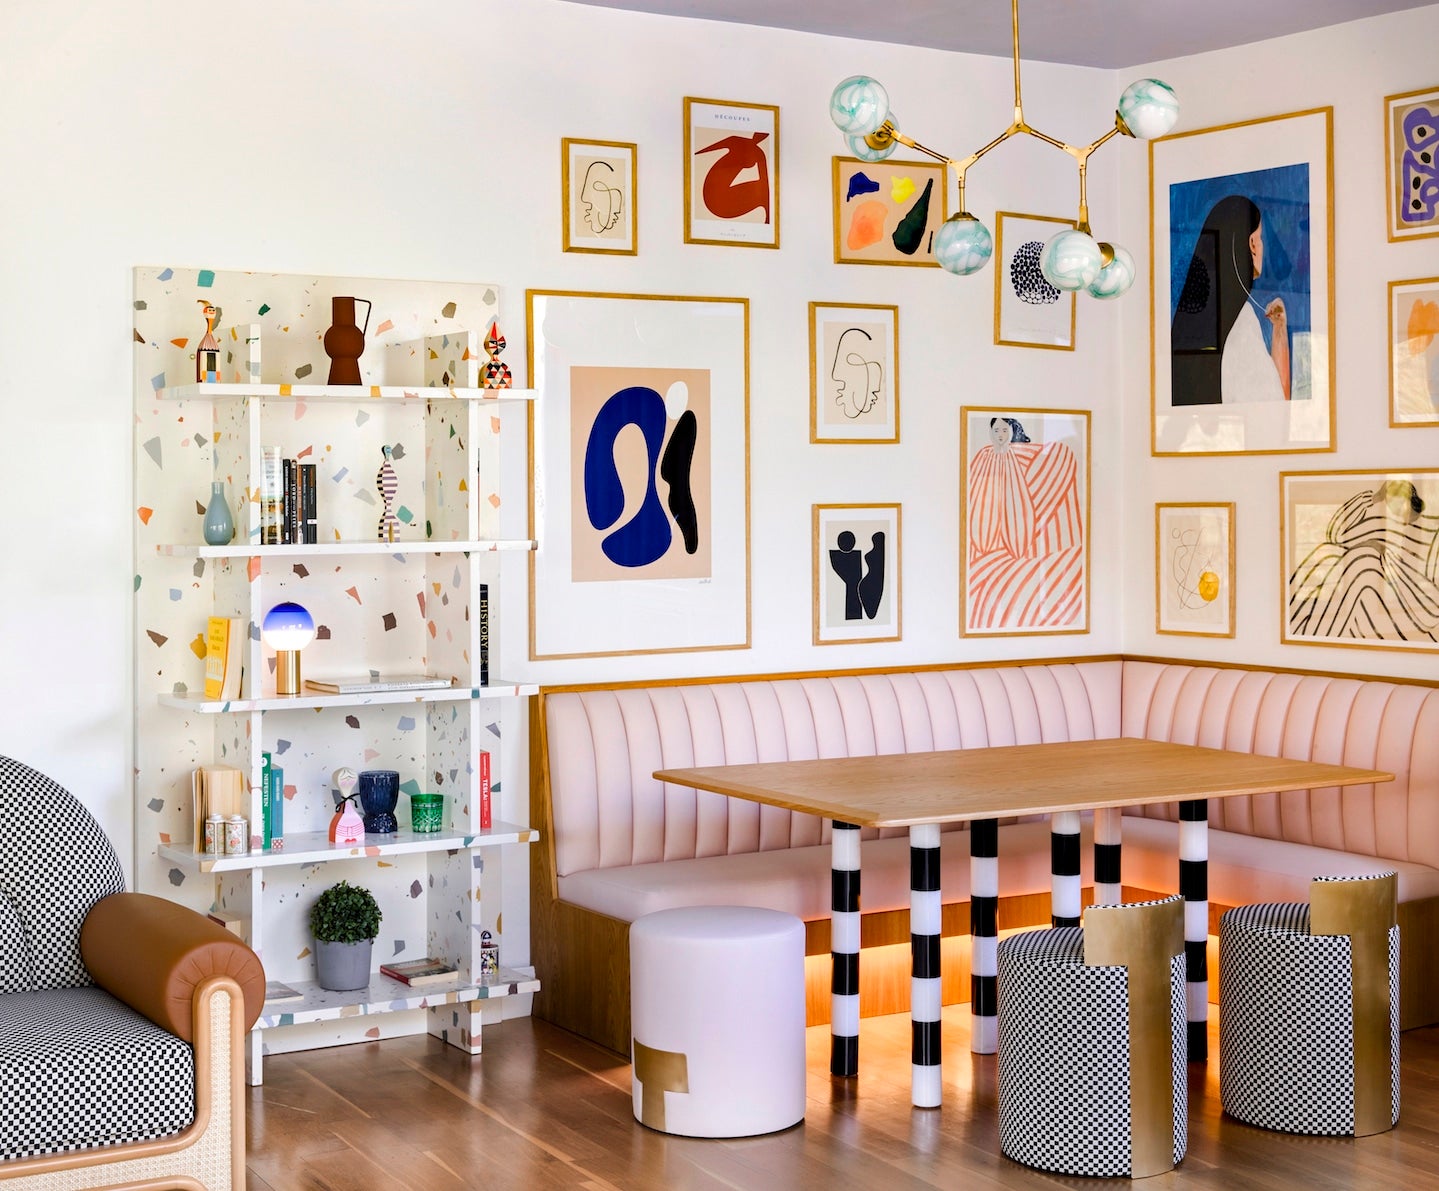 featured image for post: Merve Kahraman Maxed Out This Istanbul Pied-à-Terre with Her Own Daring Creations